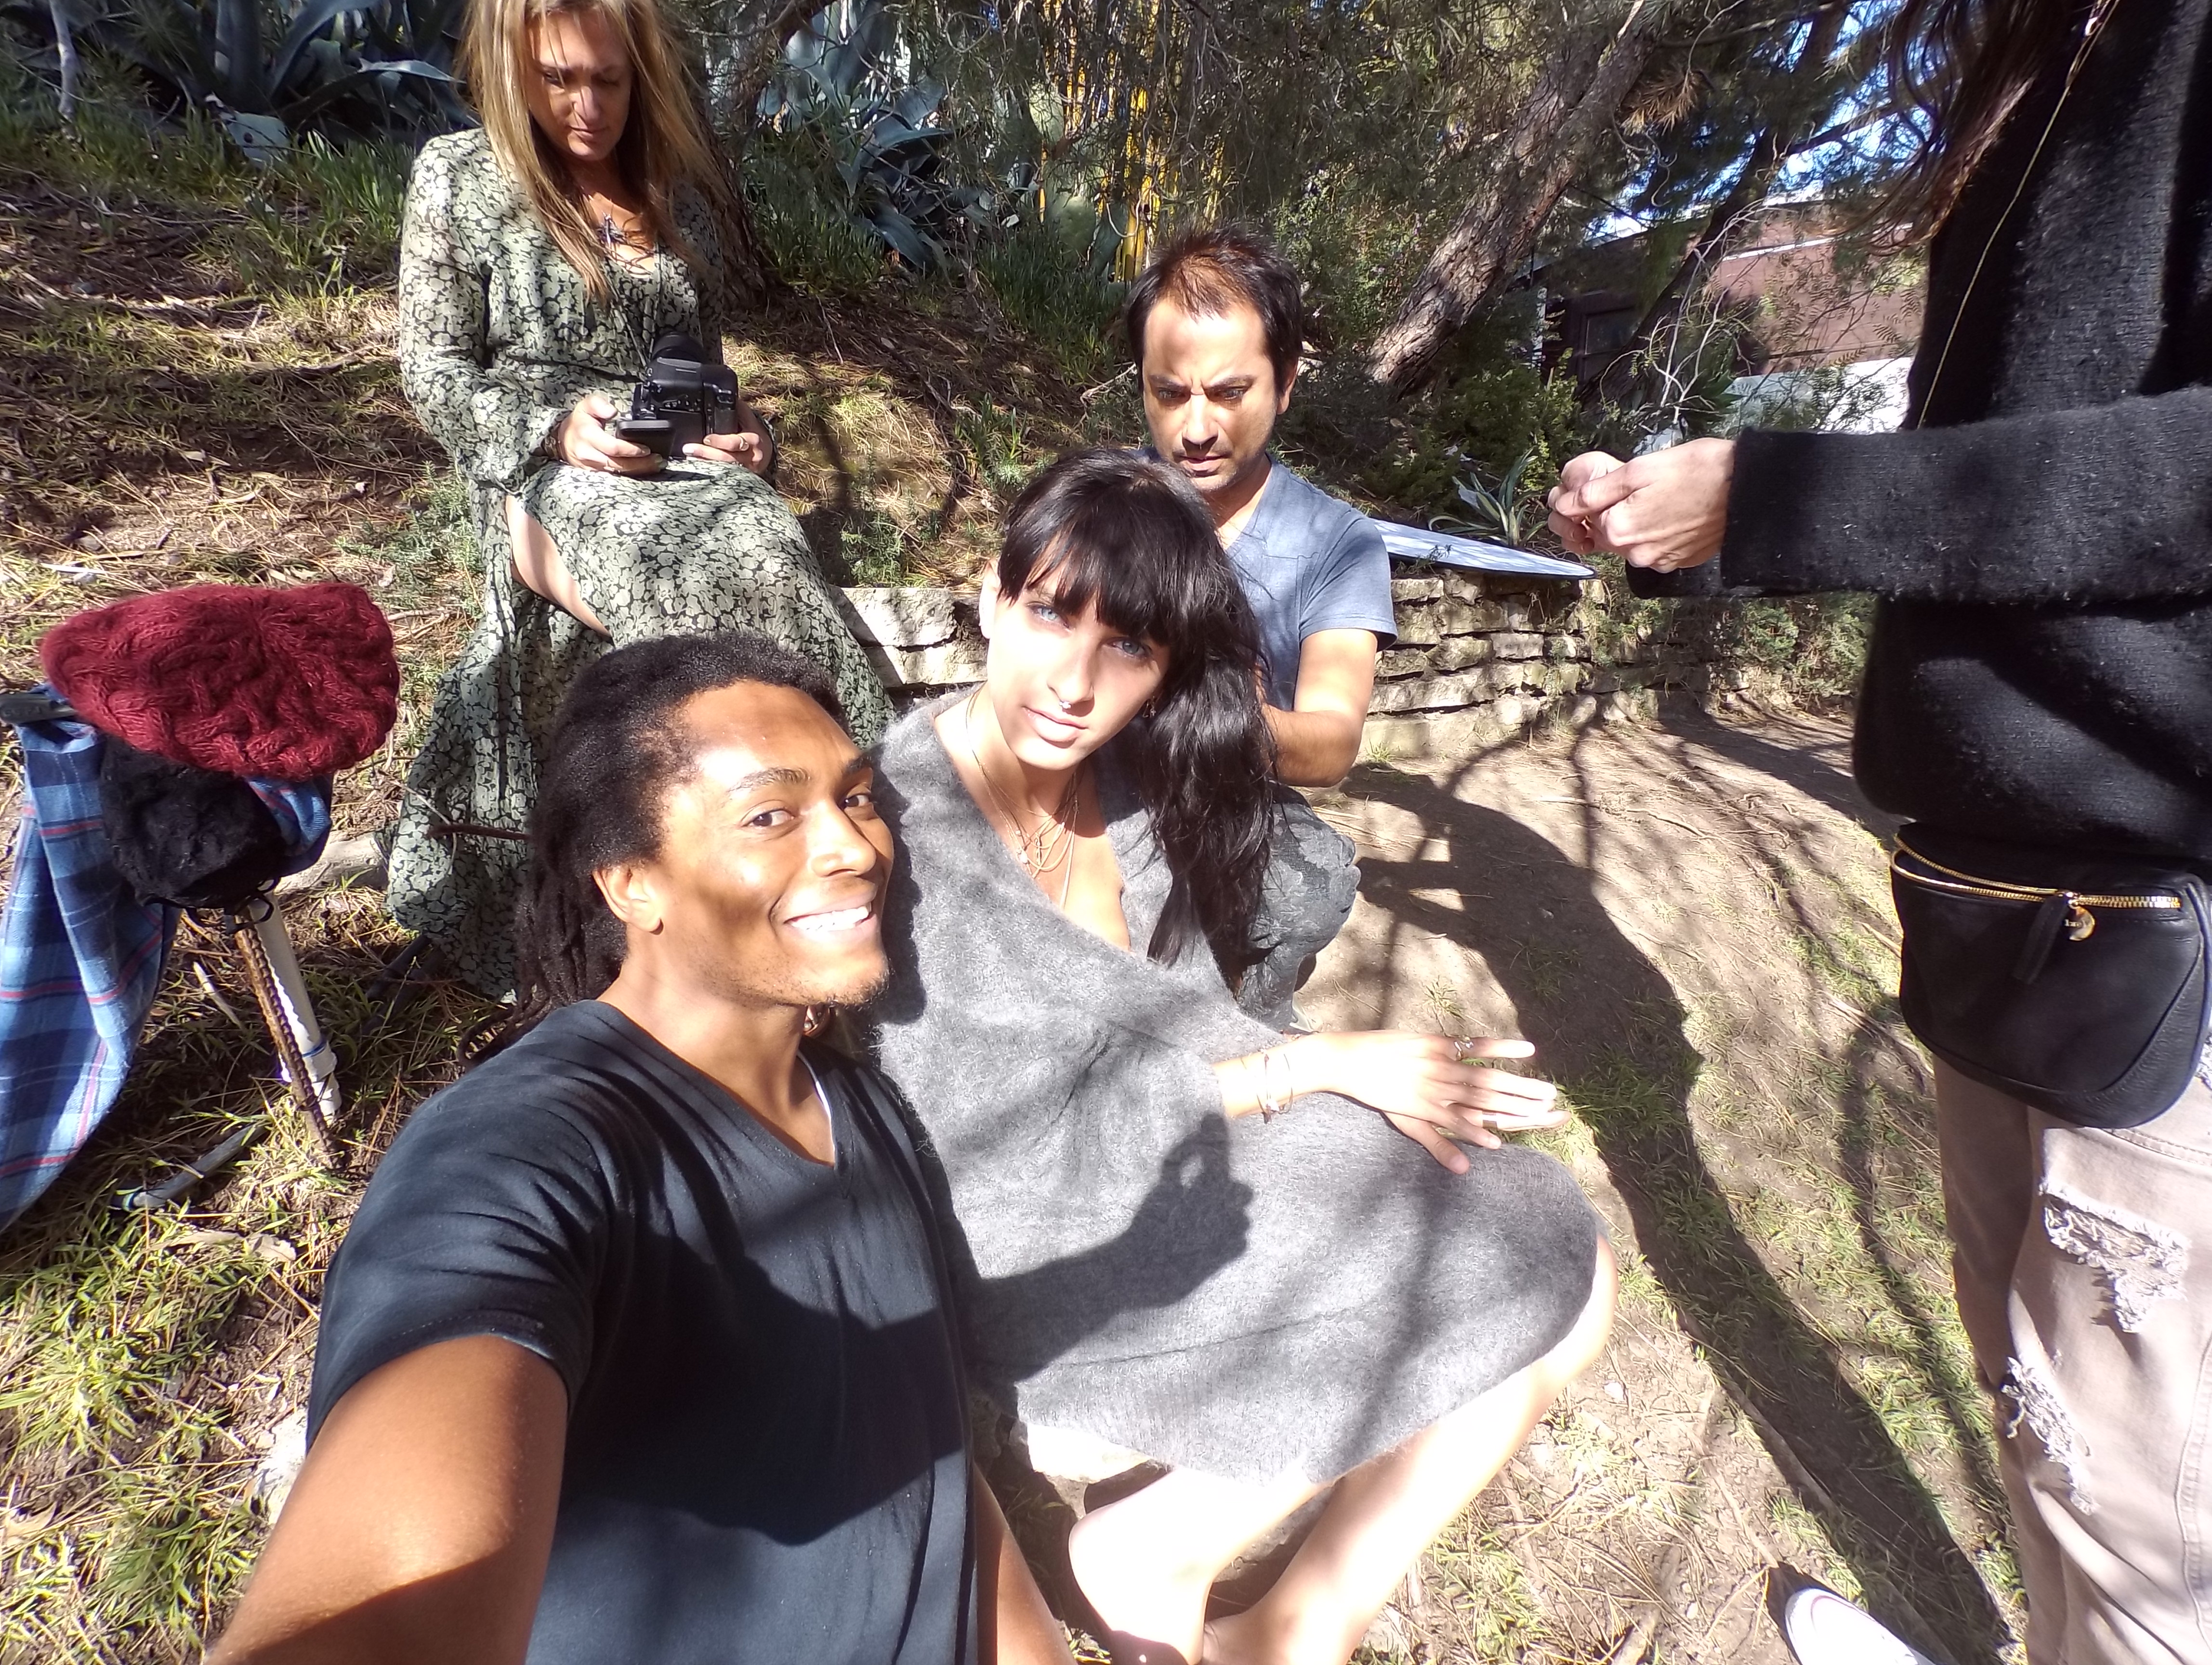 Shooting FeatheredSoullove short film with Stephanie Moore